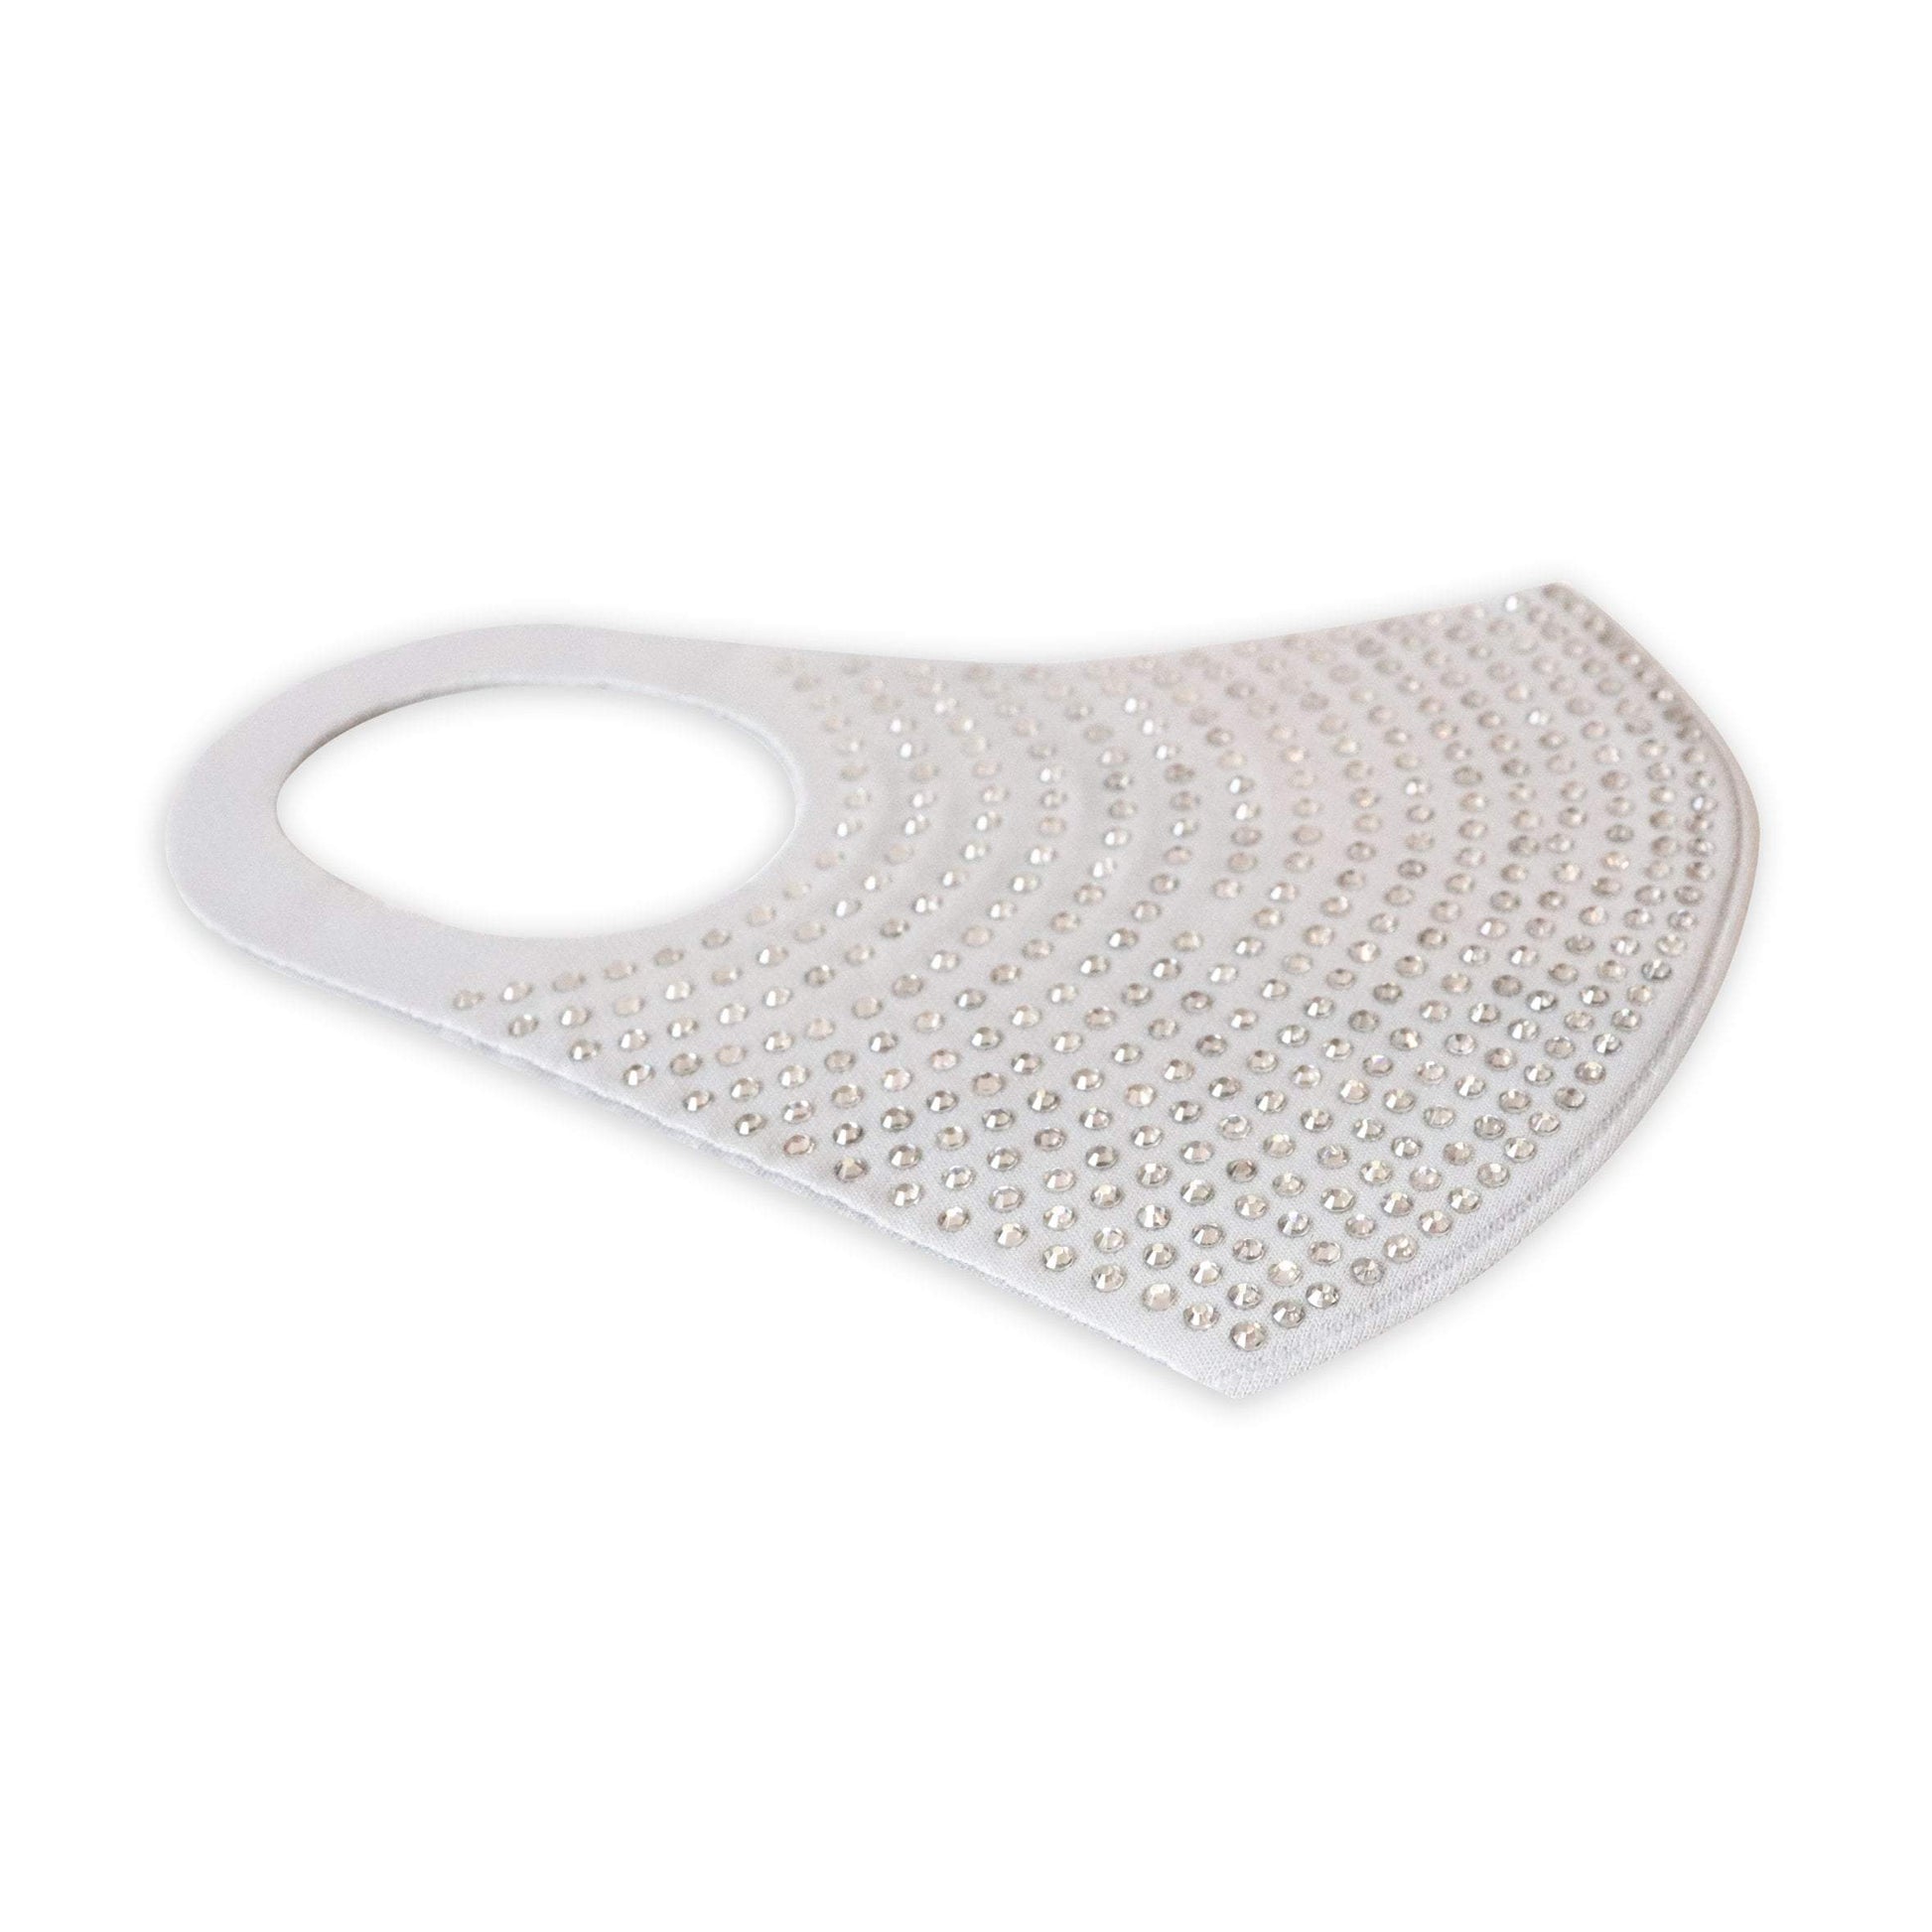 Face Mask | Bling Extra | 3 Pack | Light Grey, Silver Sweaty Bands Non Slip Headband